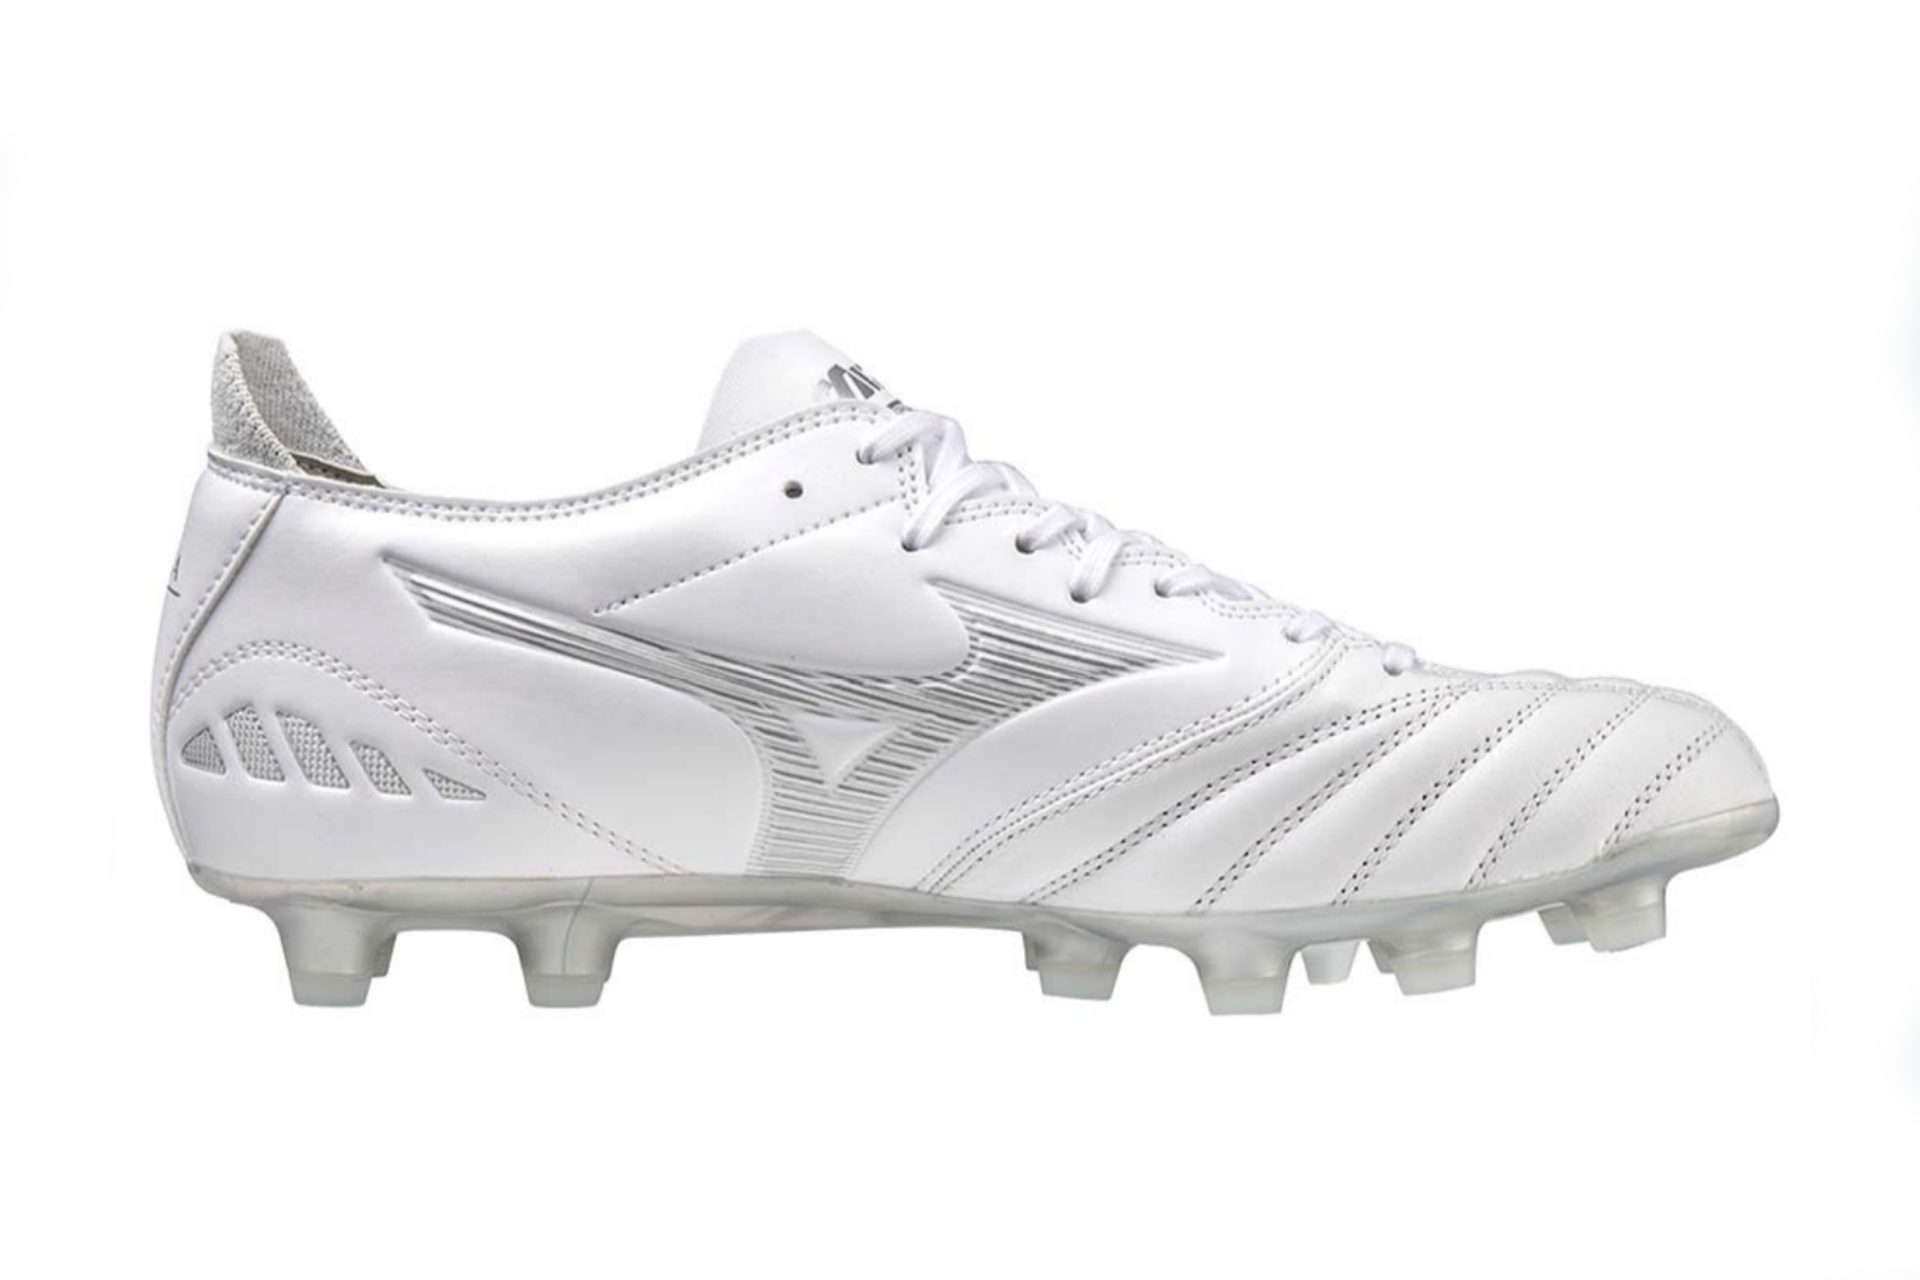 Mizuno Morelia Neo III MD wide rugby boots